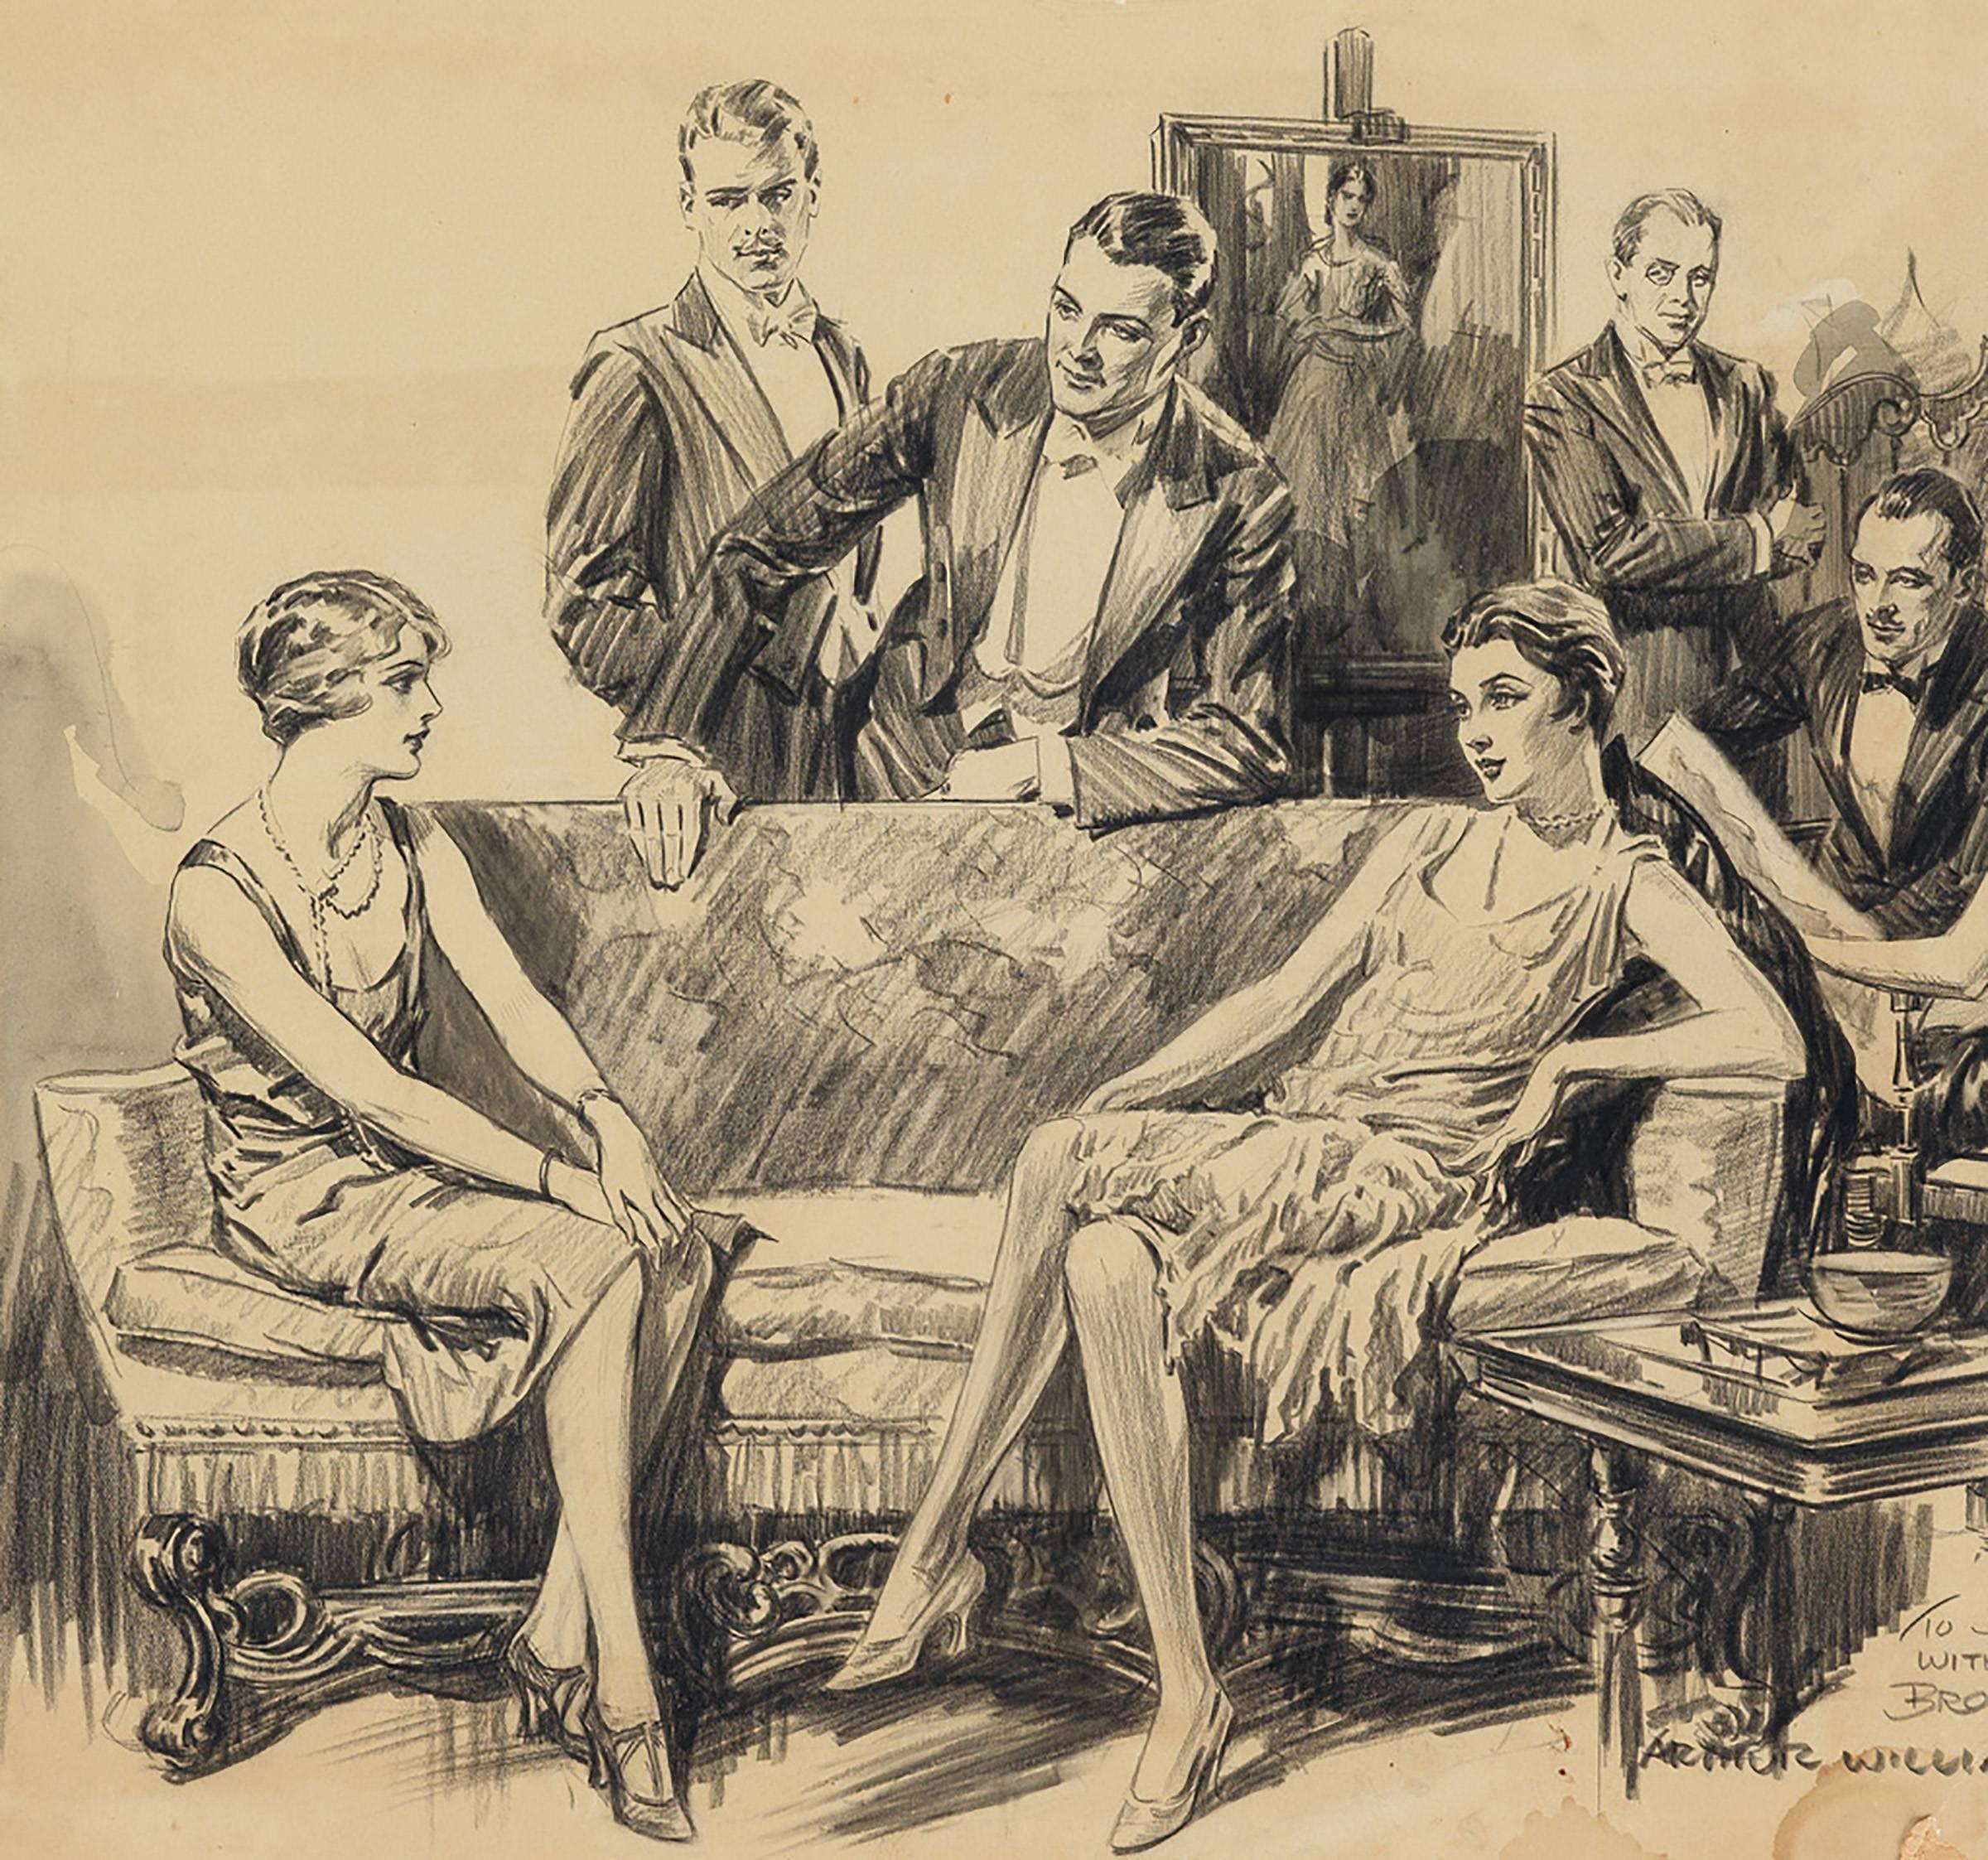 Saturday Evening Post story, 1920s Parlor Scene